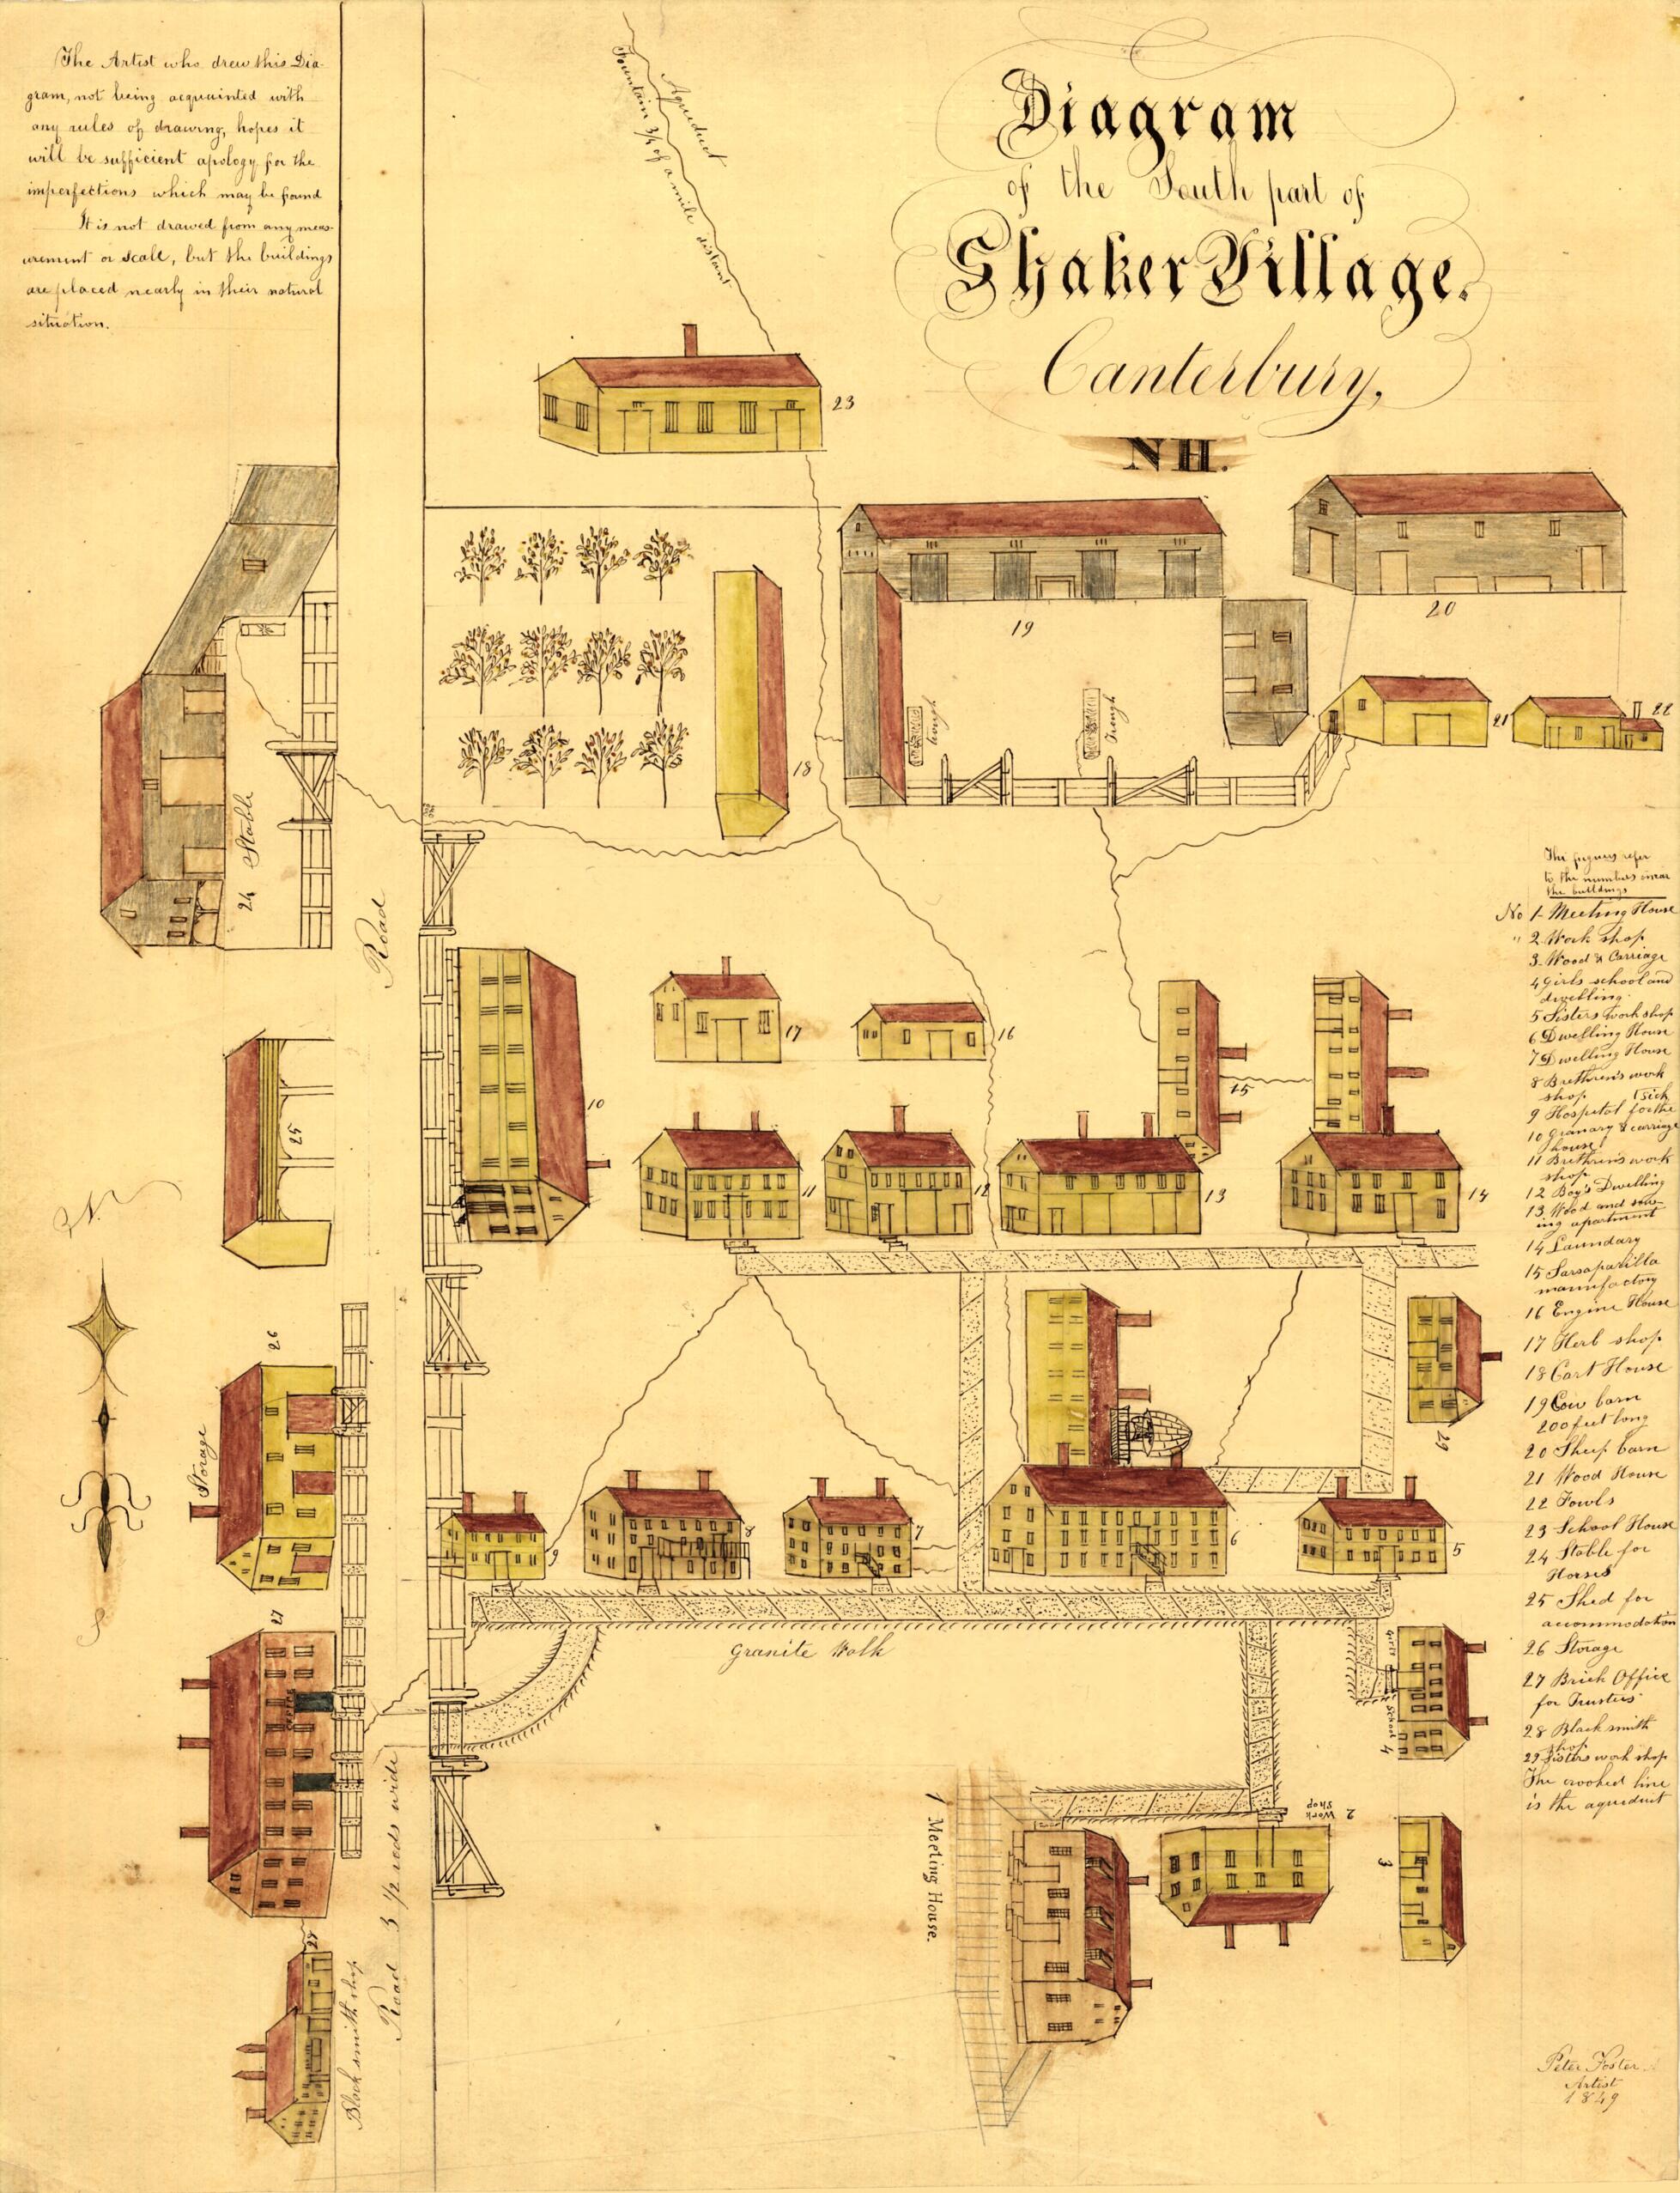 This old map of Diagram of the South Part of Shaker Village, Canterbury, NH from 1849 was created by Peter Foster in 1849